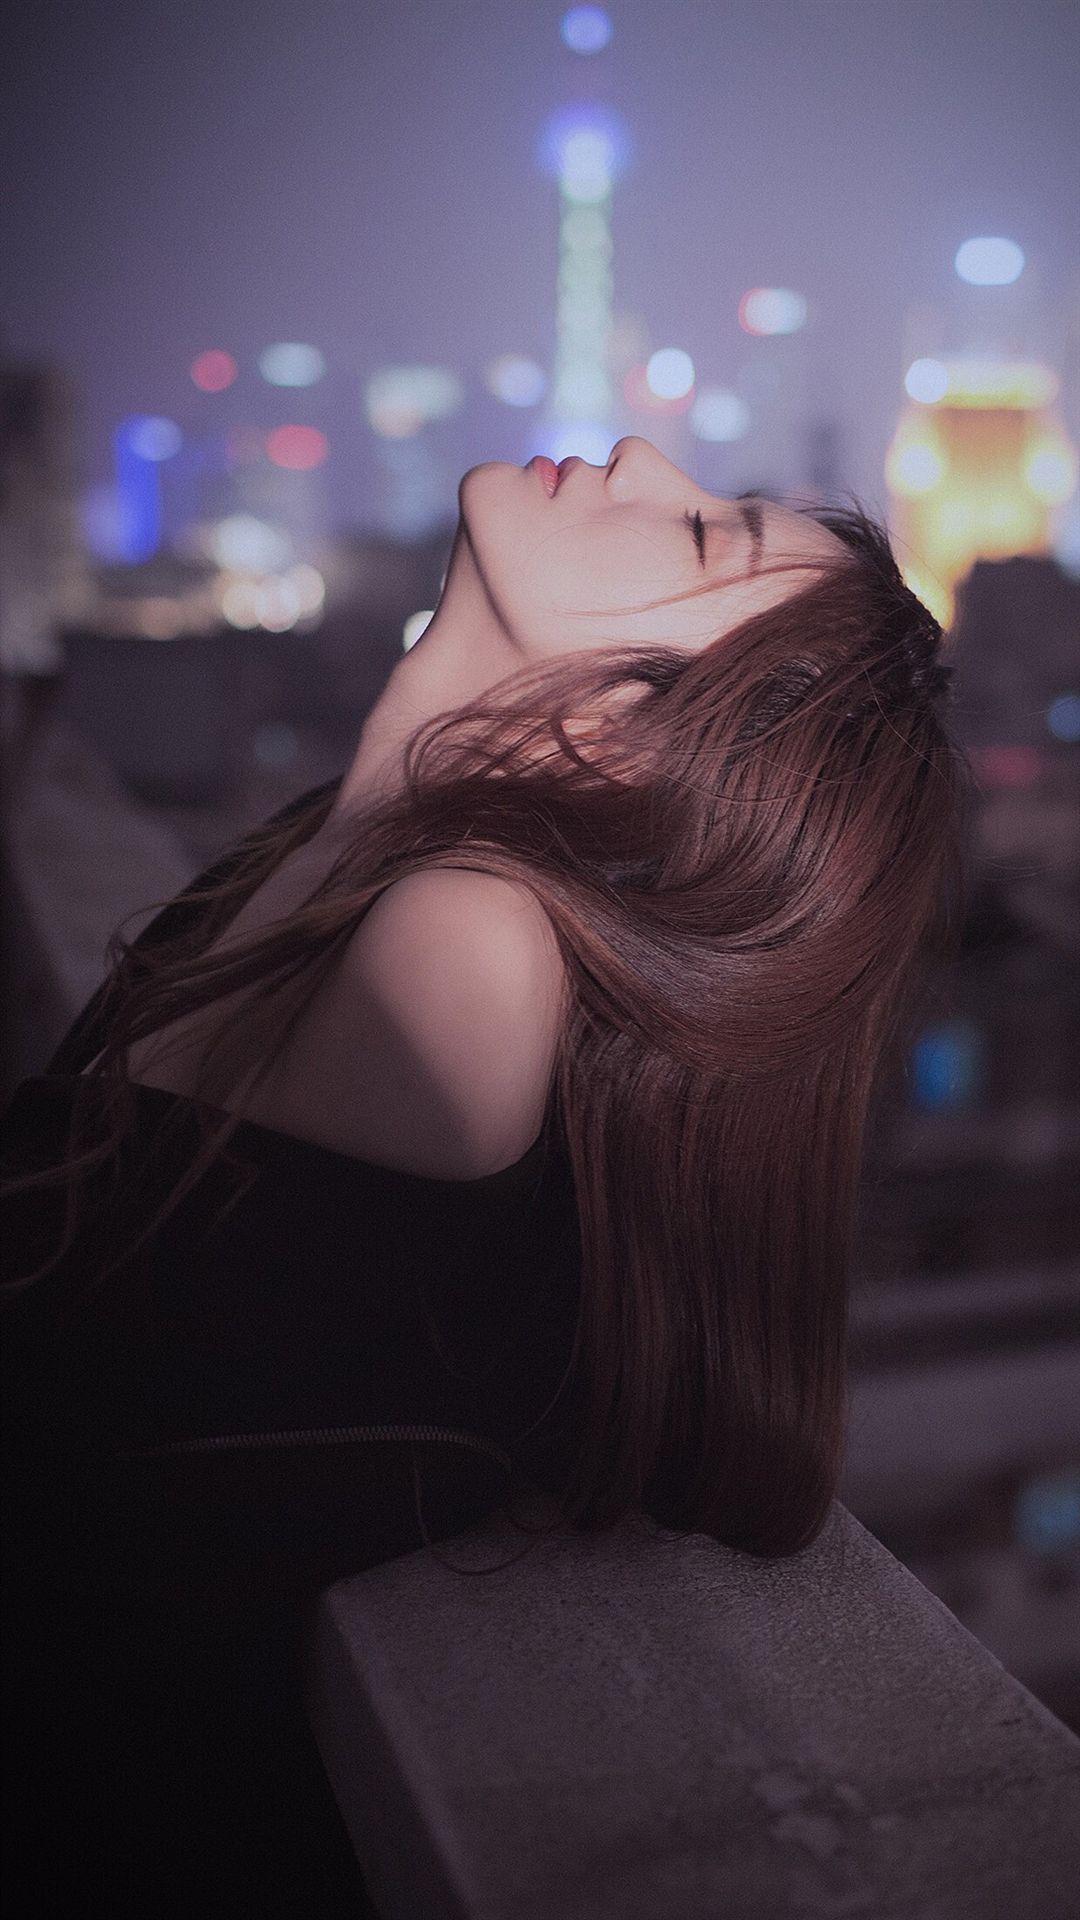 Night City Looking Up Beauty Girl IPhone 6 Wallpaper Download. IPhone Wallpaper, IPad Wallpaper One Stop Downloa. Girl Photography, Beauty Girl, Aesthetic Girl